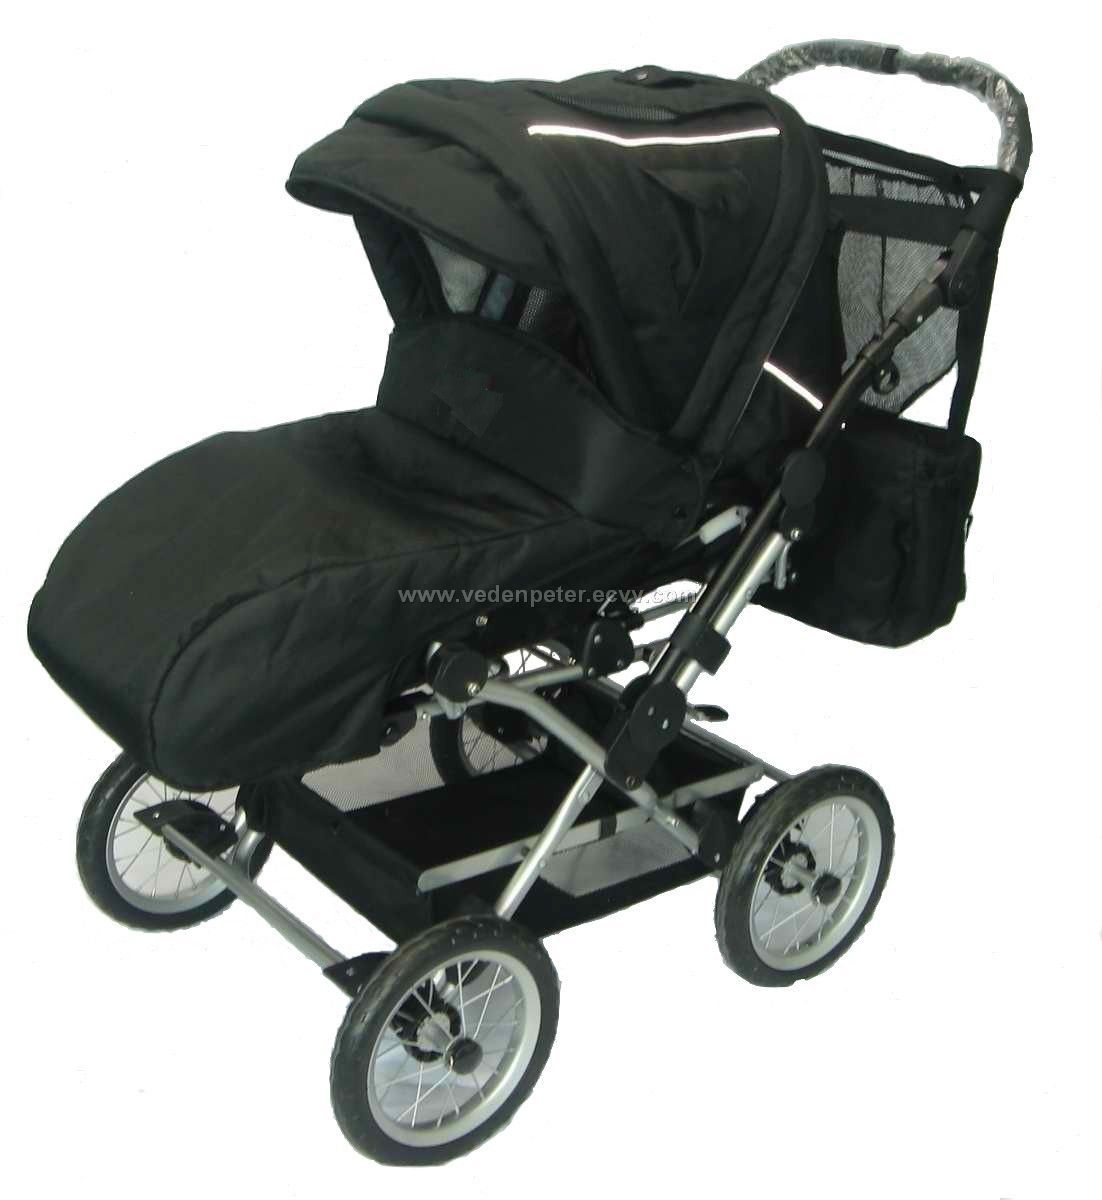 Discount strollers and car seats